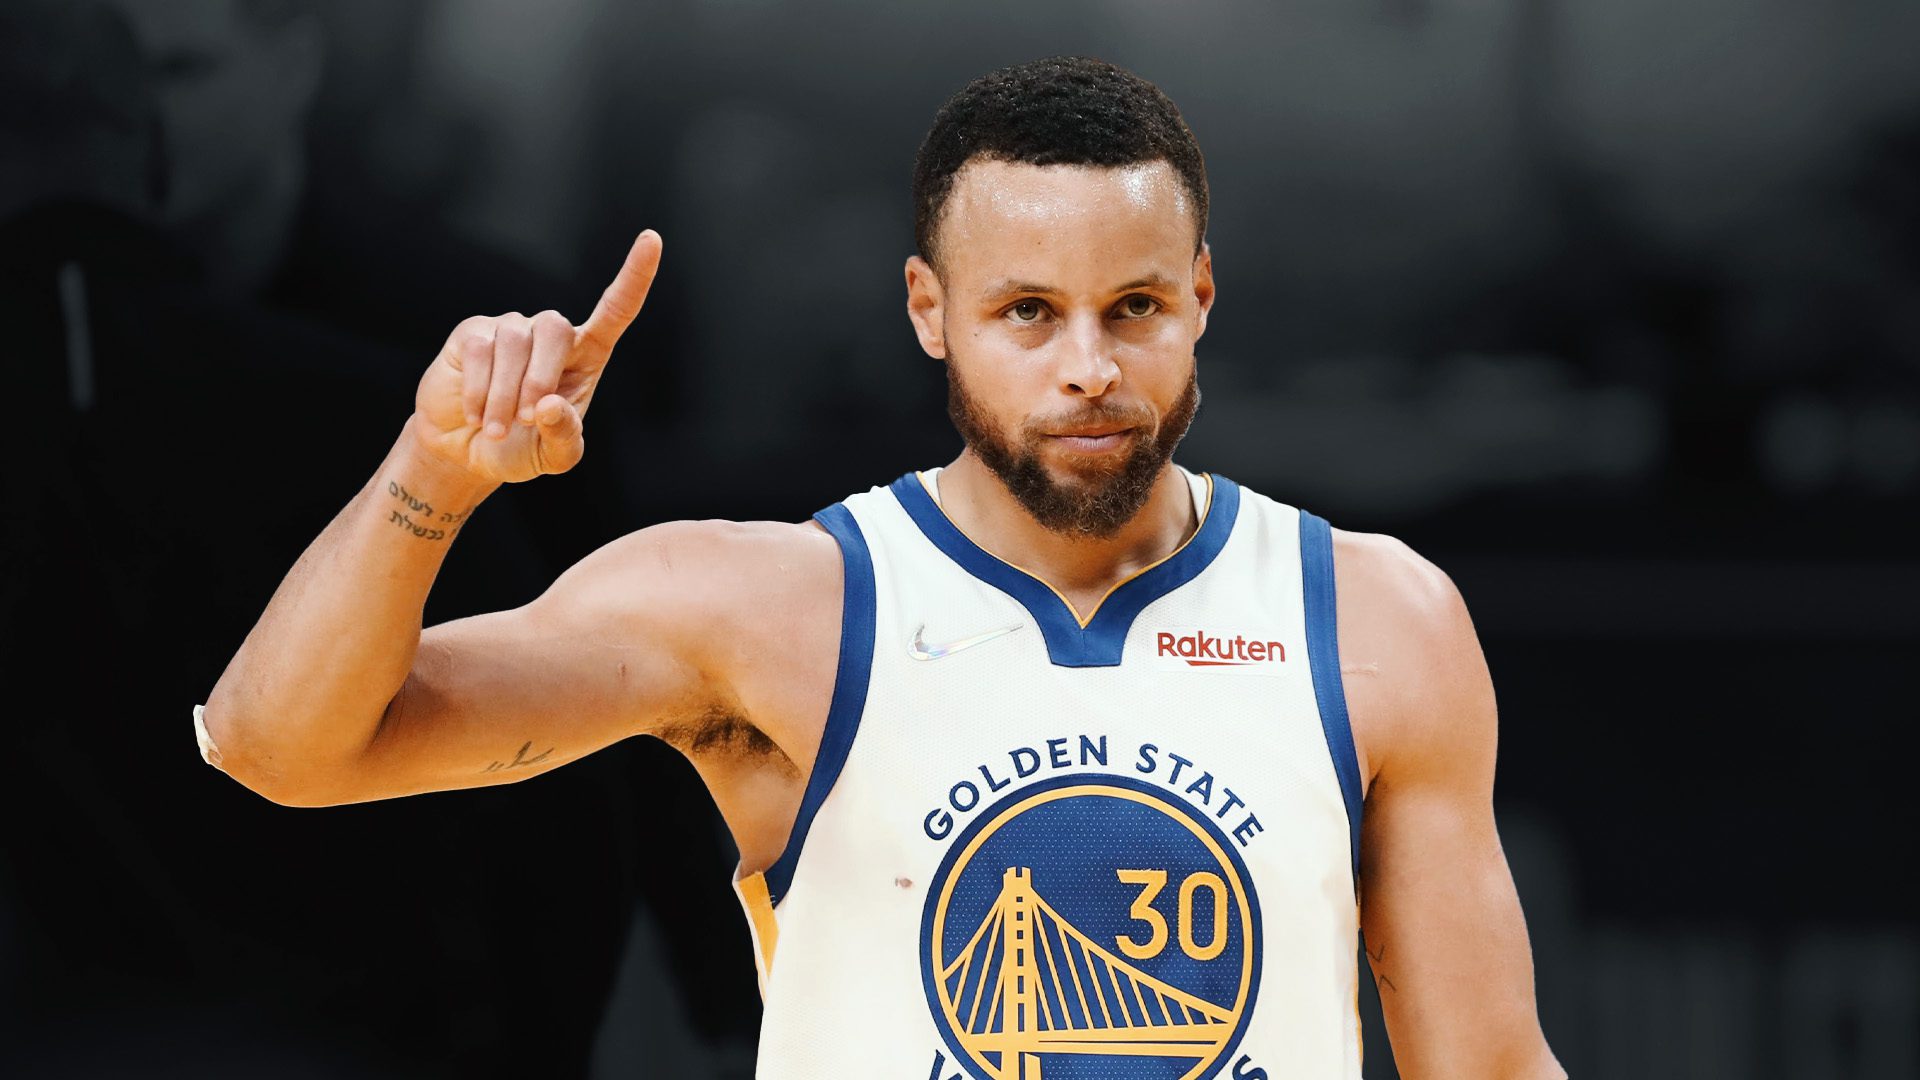 Steph Curry Reveals True Feelings on Playing into His 40s